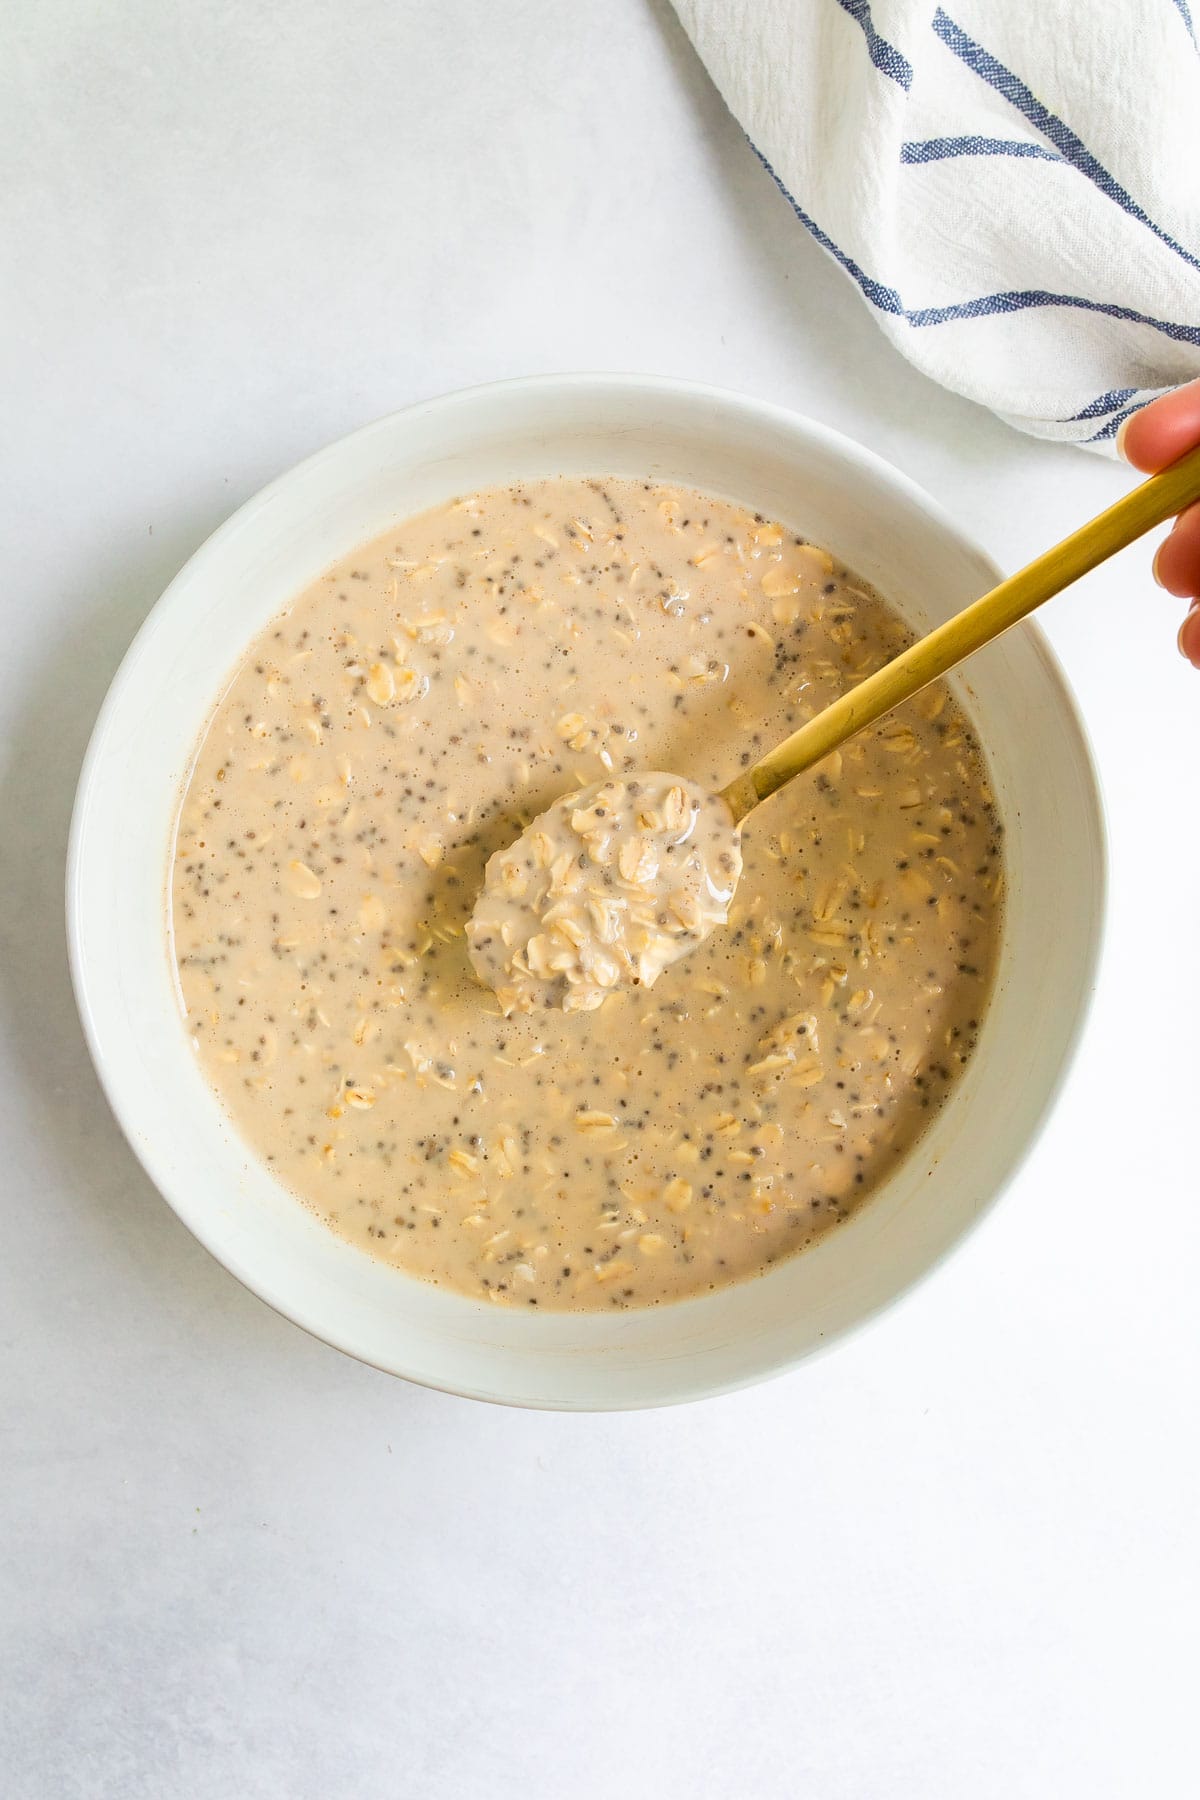 Spoon with a spoonful of protein overnight oats from a bowl.